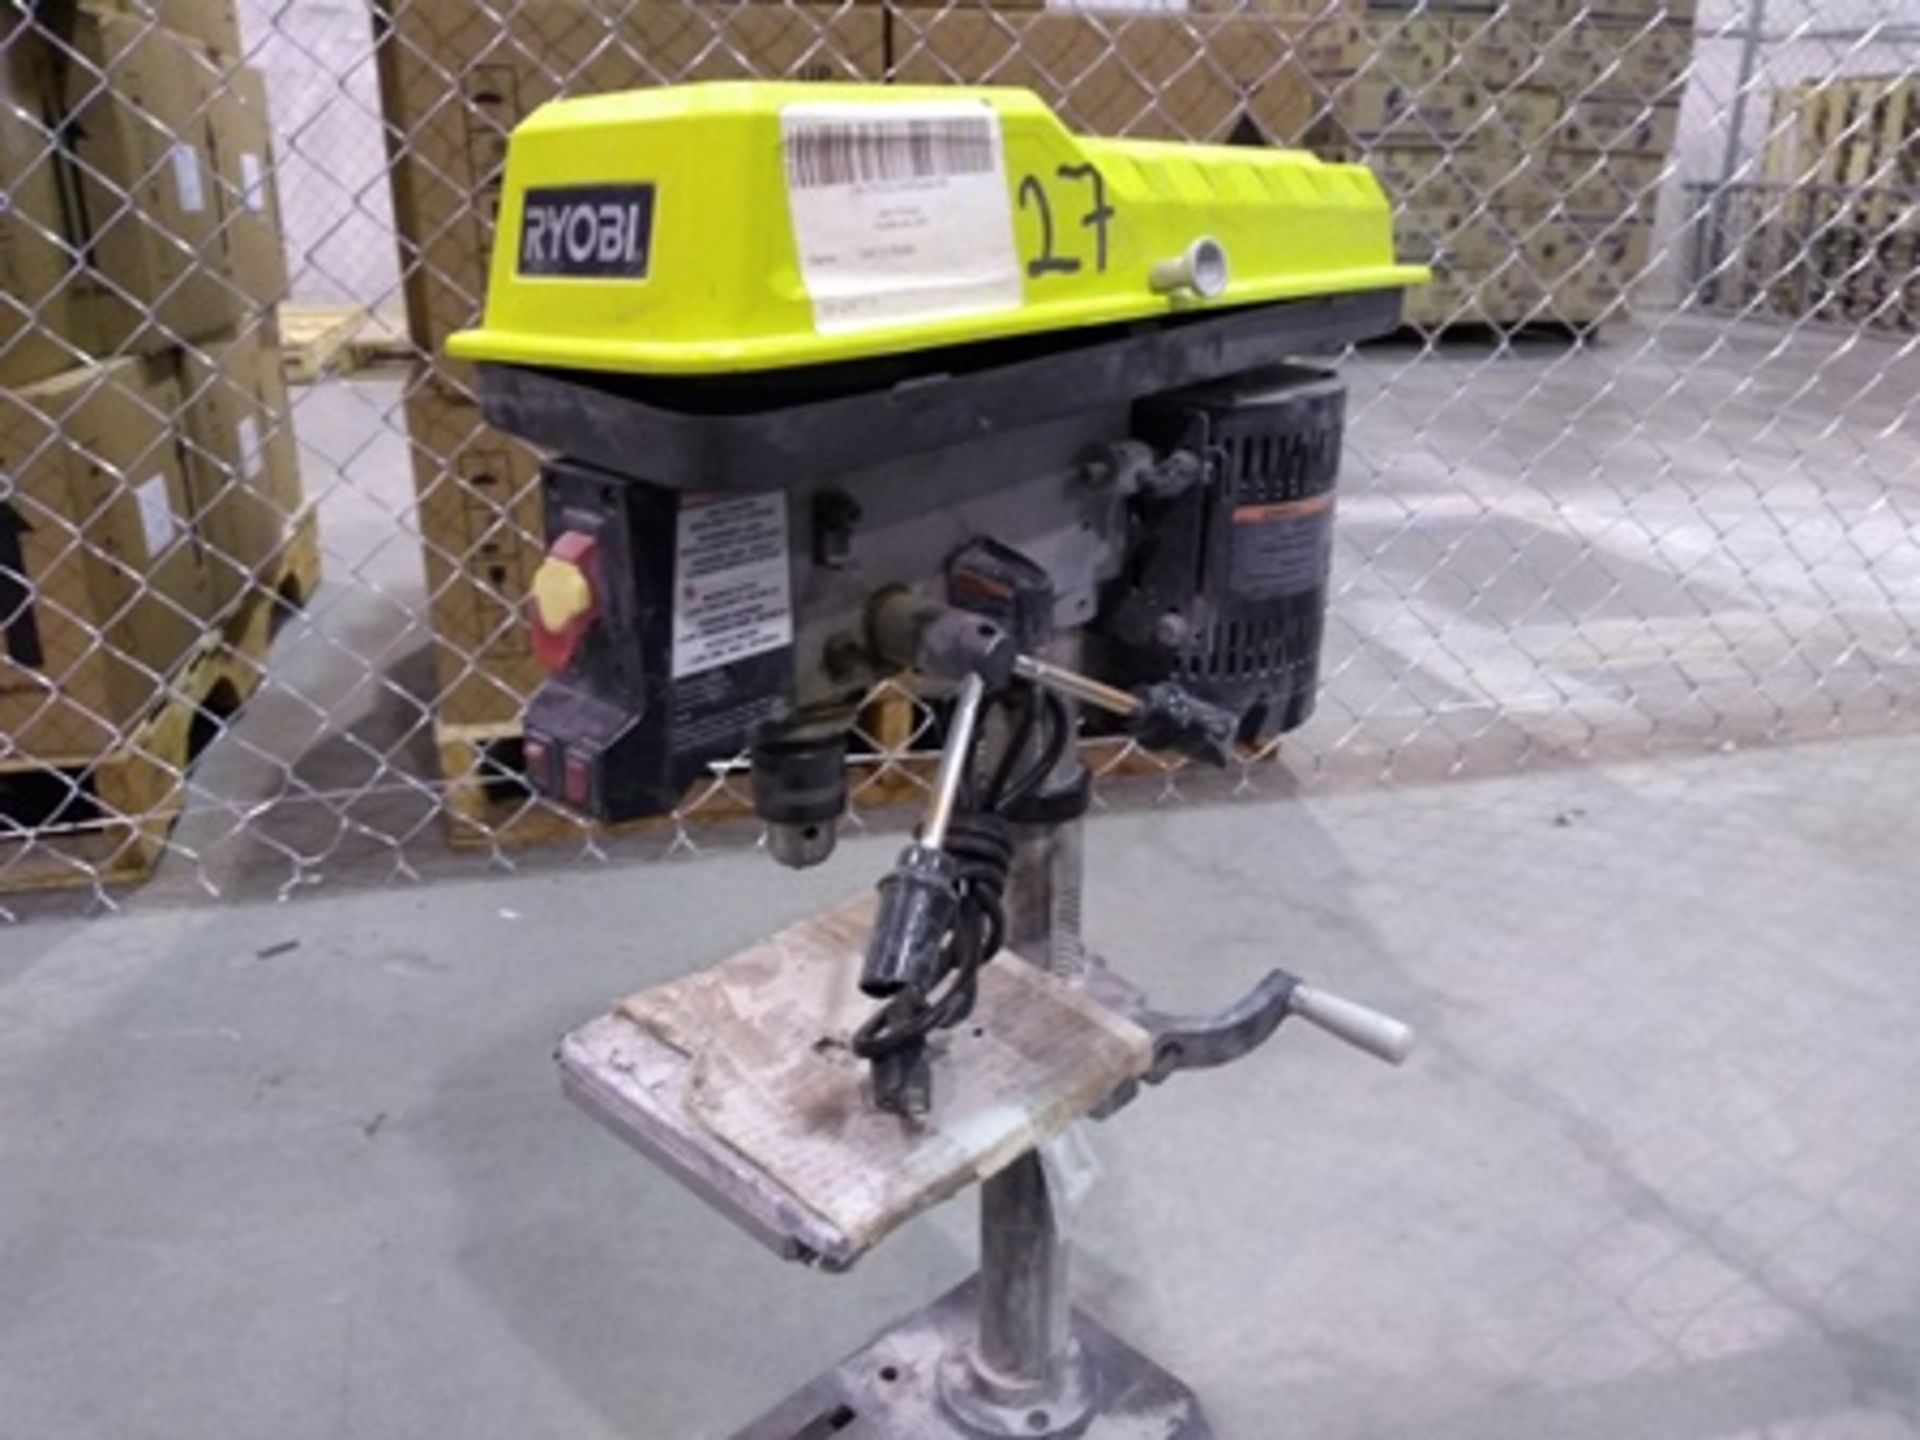 Riobi column drill (chuck and lasser alignment system included), 1/2 hp engine. - Image 3 of 14